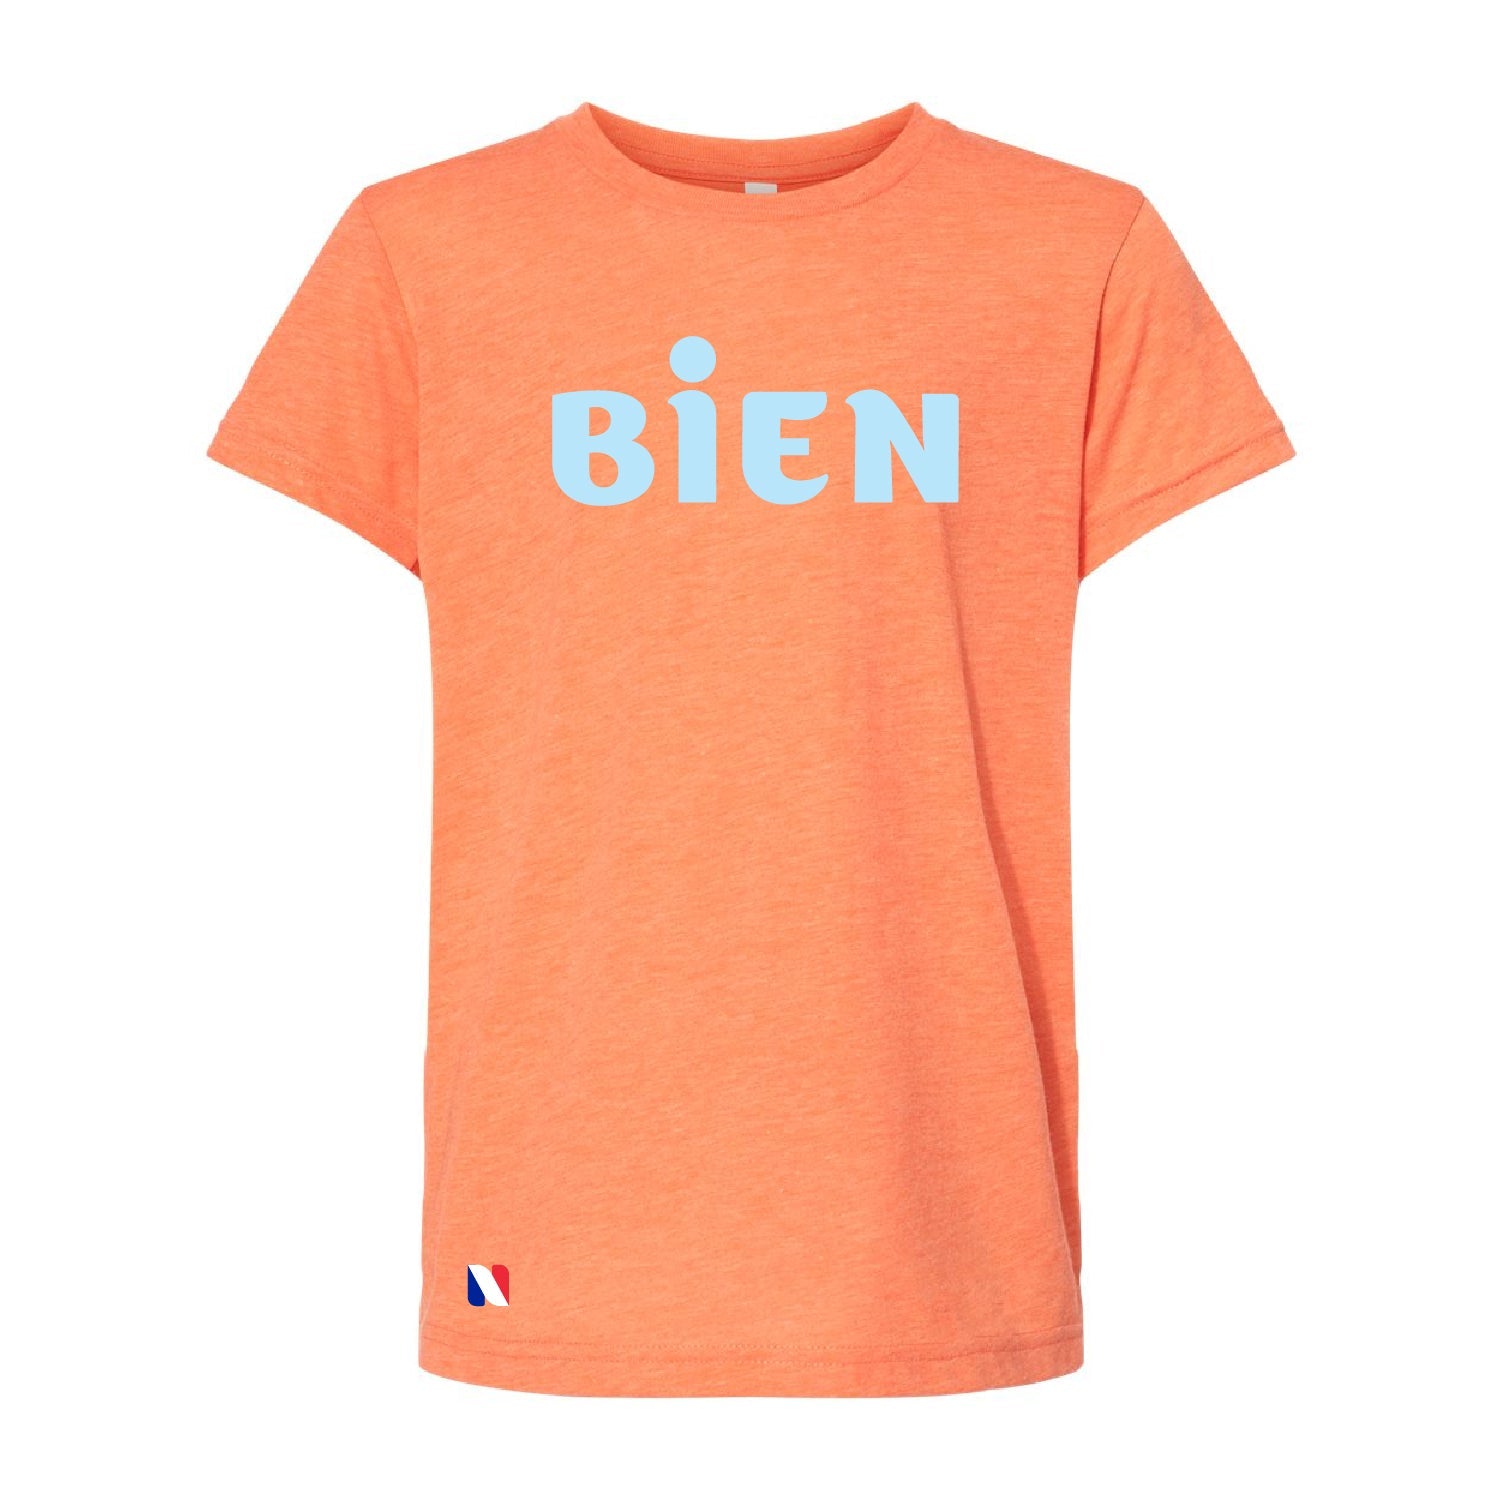 BIEN - YOUTH TRIBLEND TEE - DSP On Demand